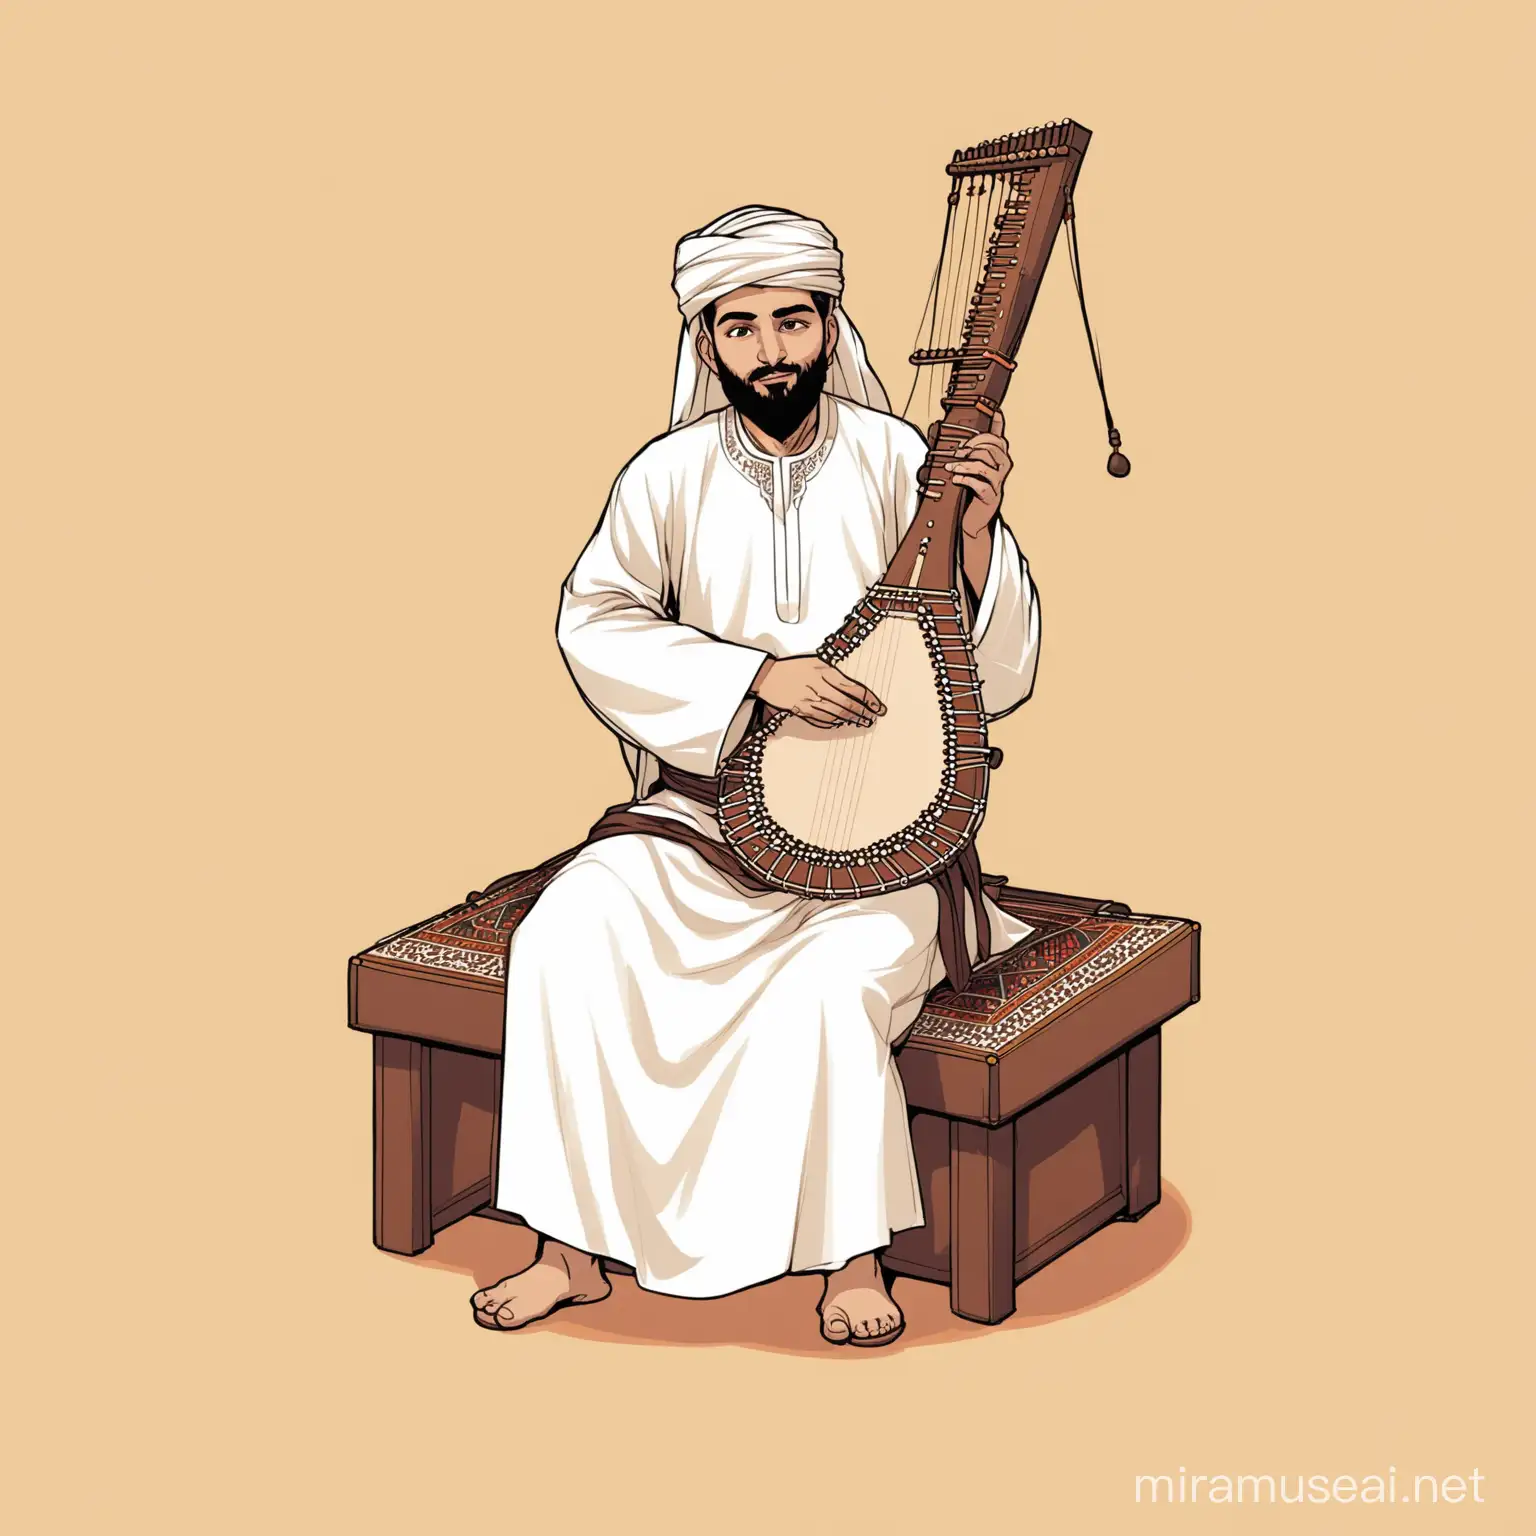 a photo of a man playing the rebab musical instrument, full body, cartoon drawing